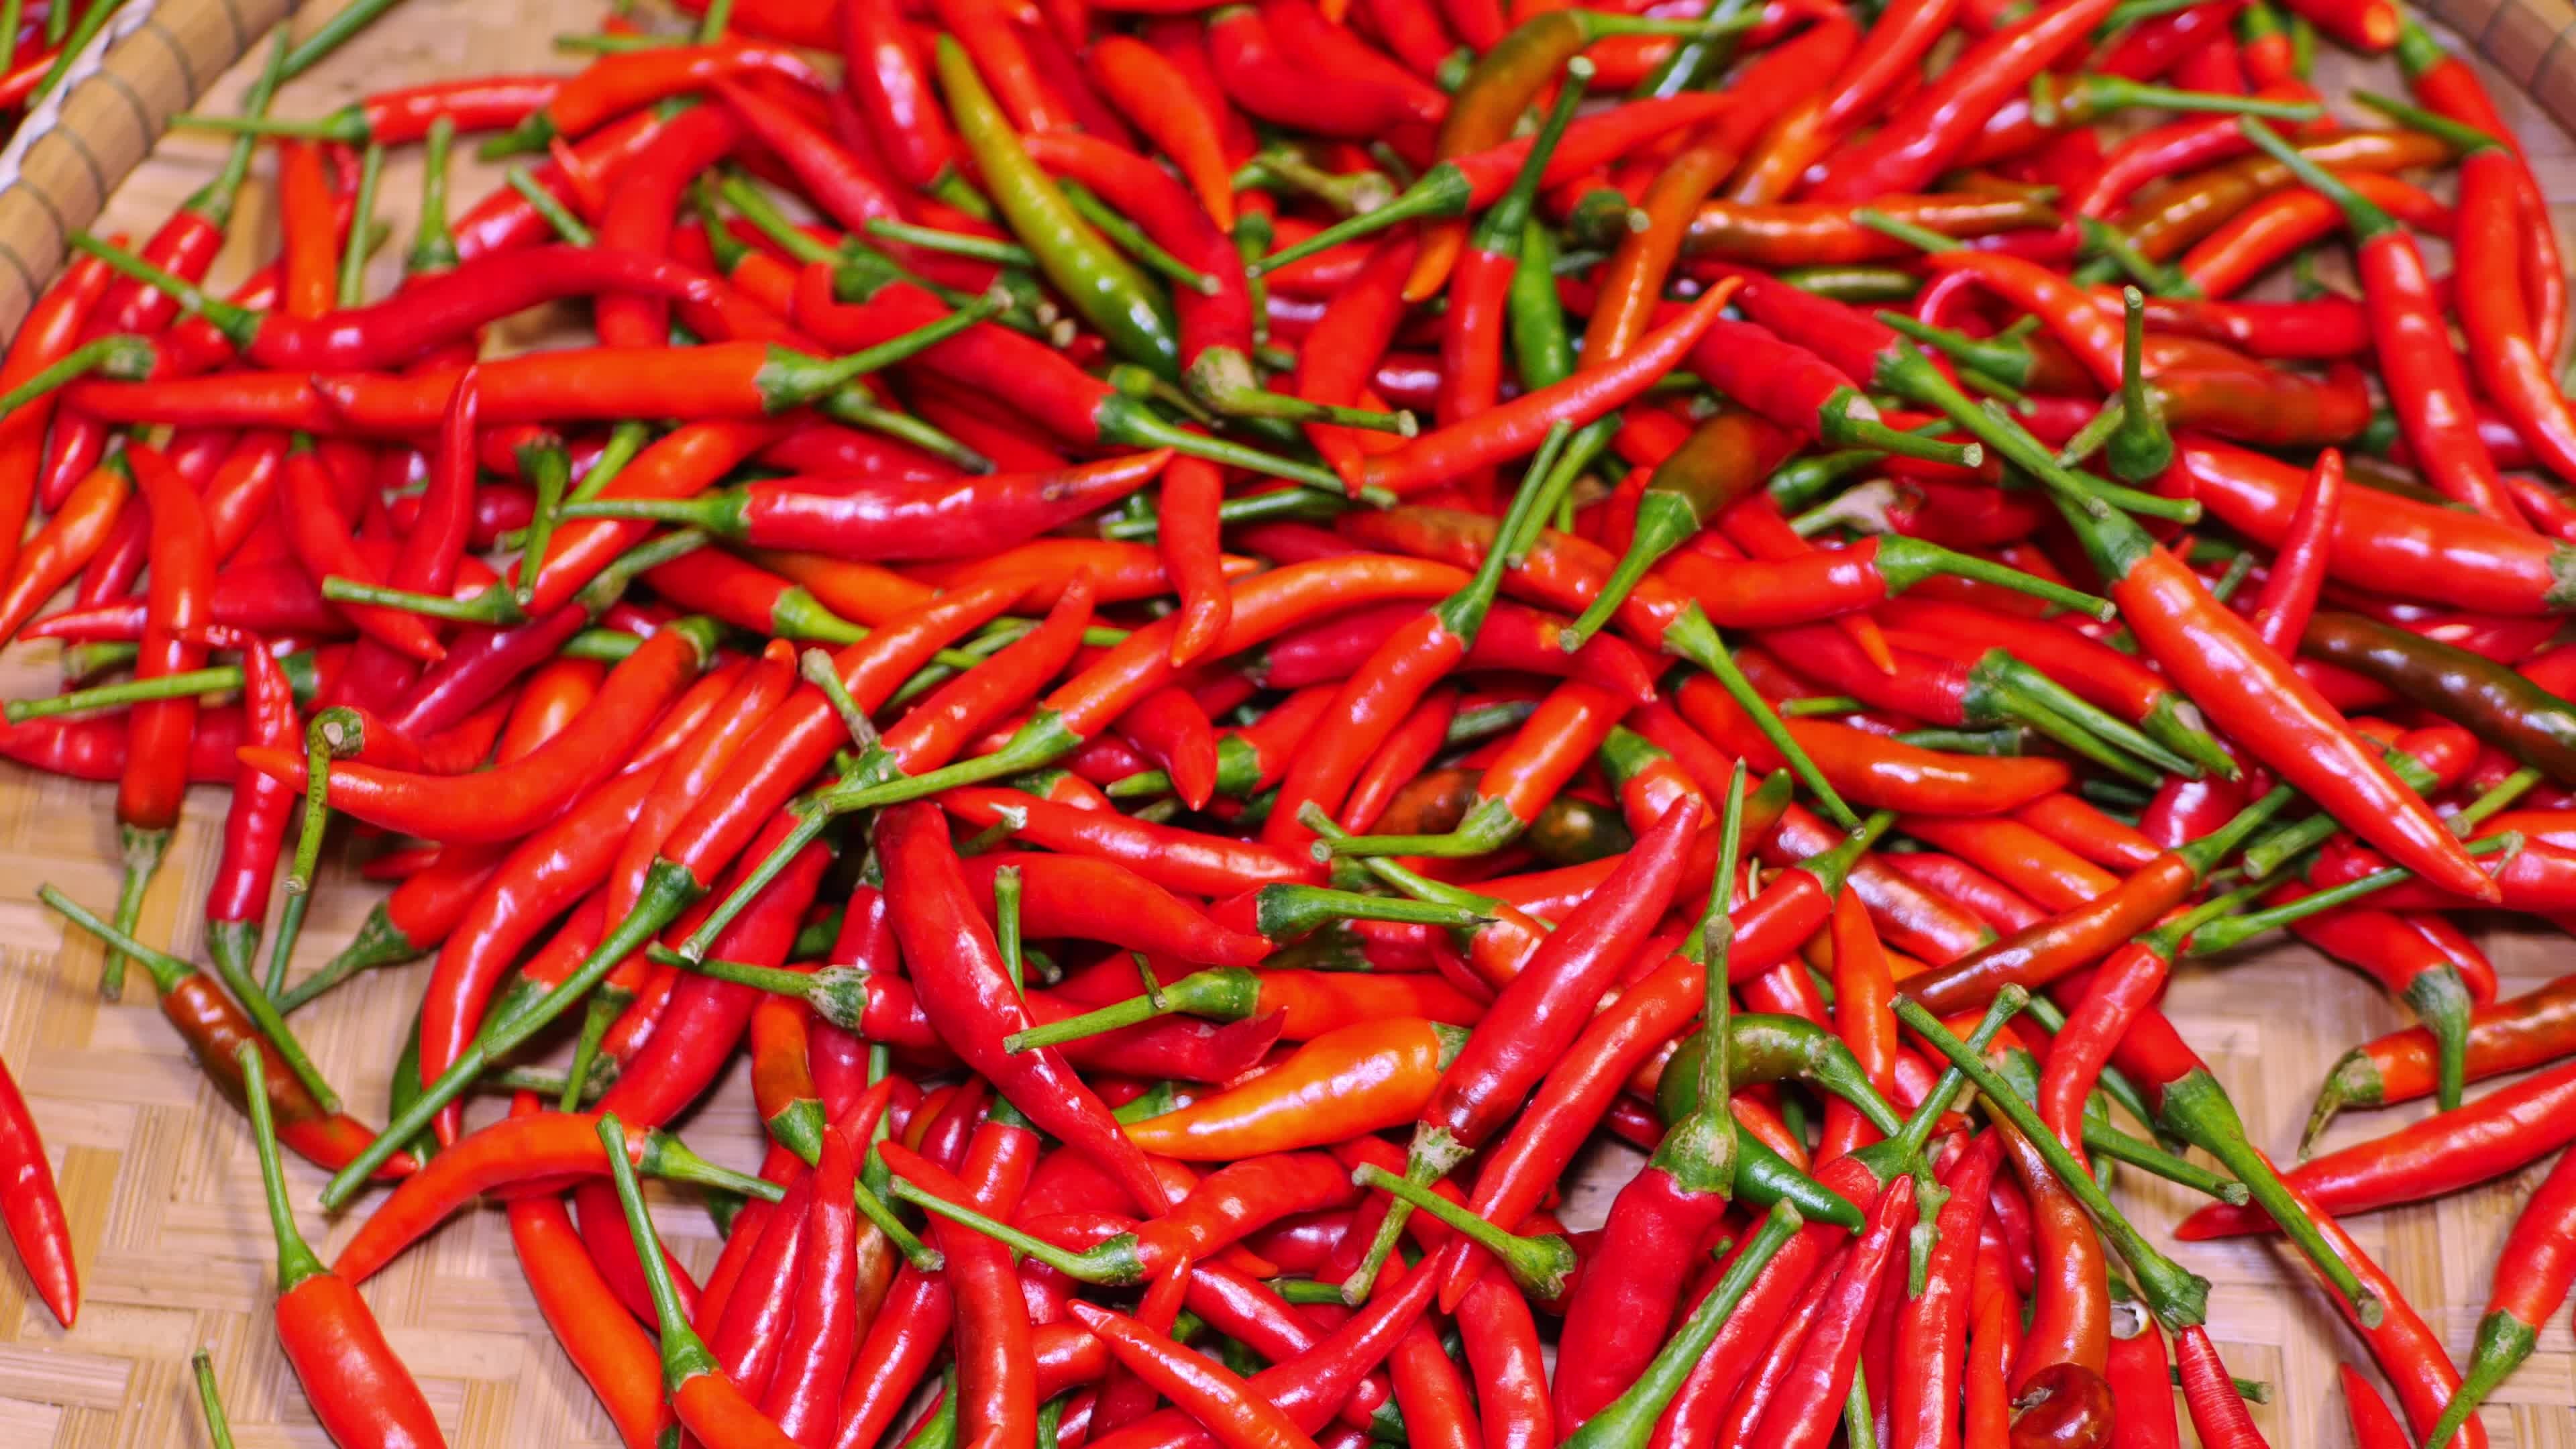 Spicy ingredient, Culinary heat, Vibrant red color, Cooking staple, 3840x2160 4K Desktop